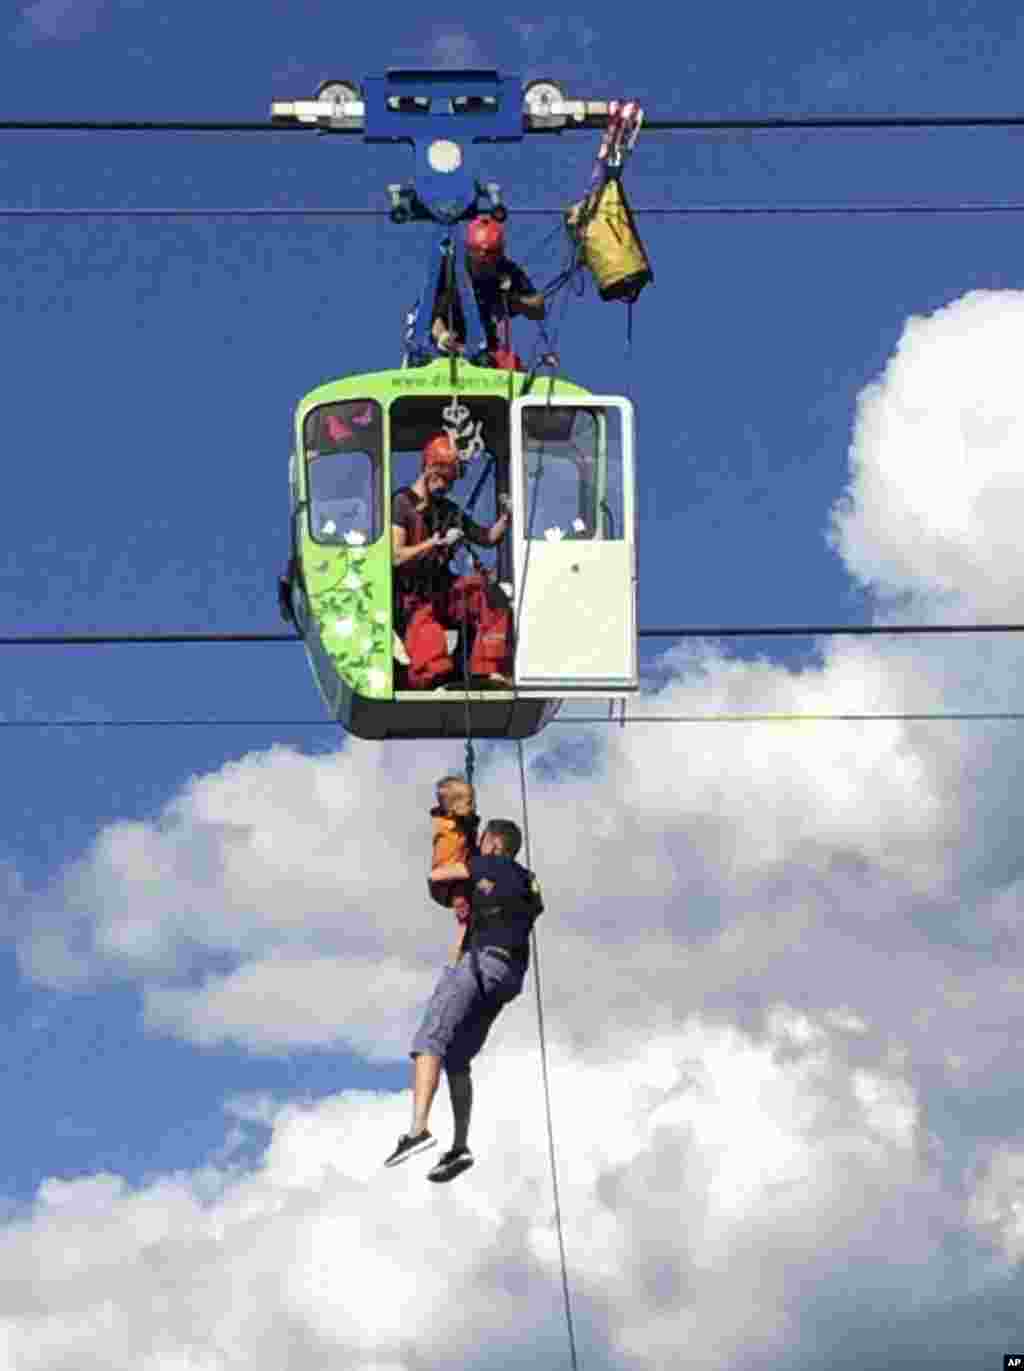 Members of the fire service rescue people from a cable car gondola, in Cologne, Germany, July 30, 2017.